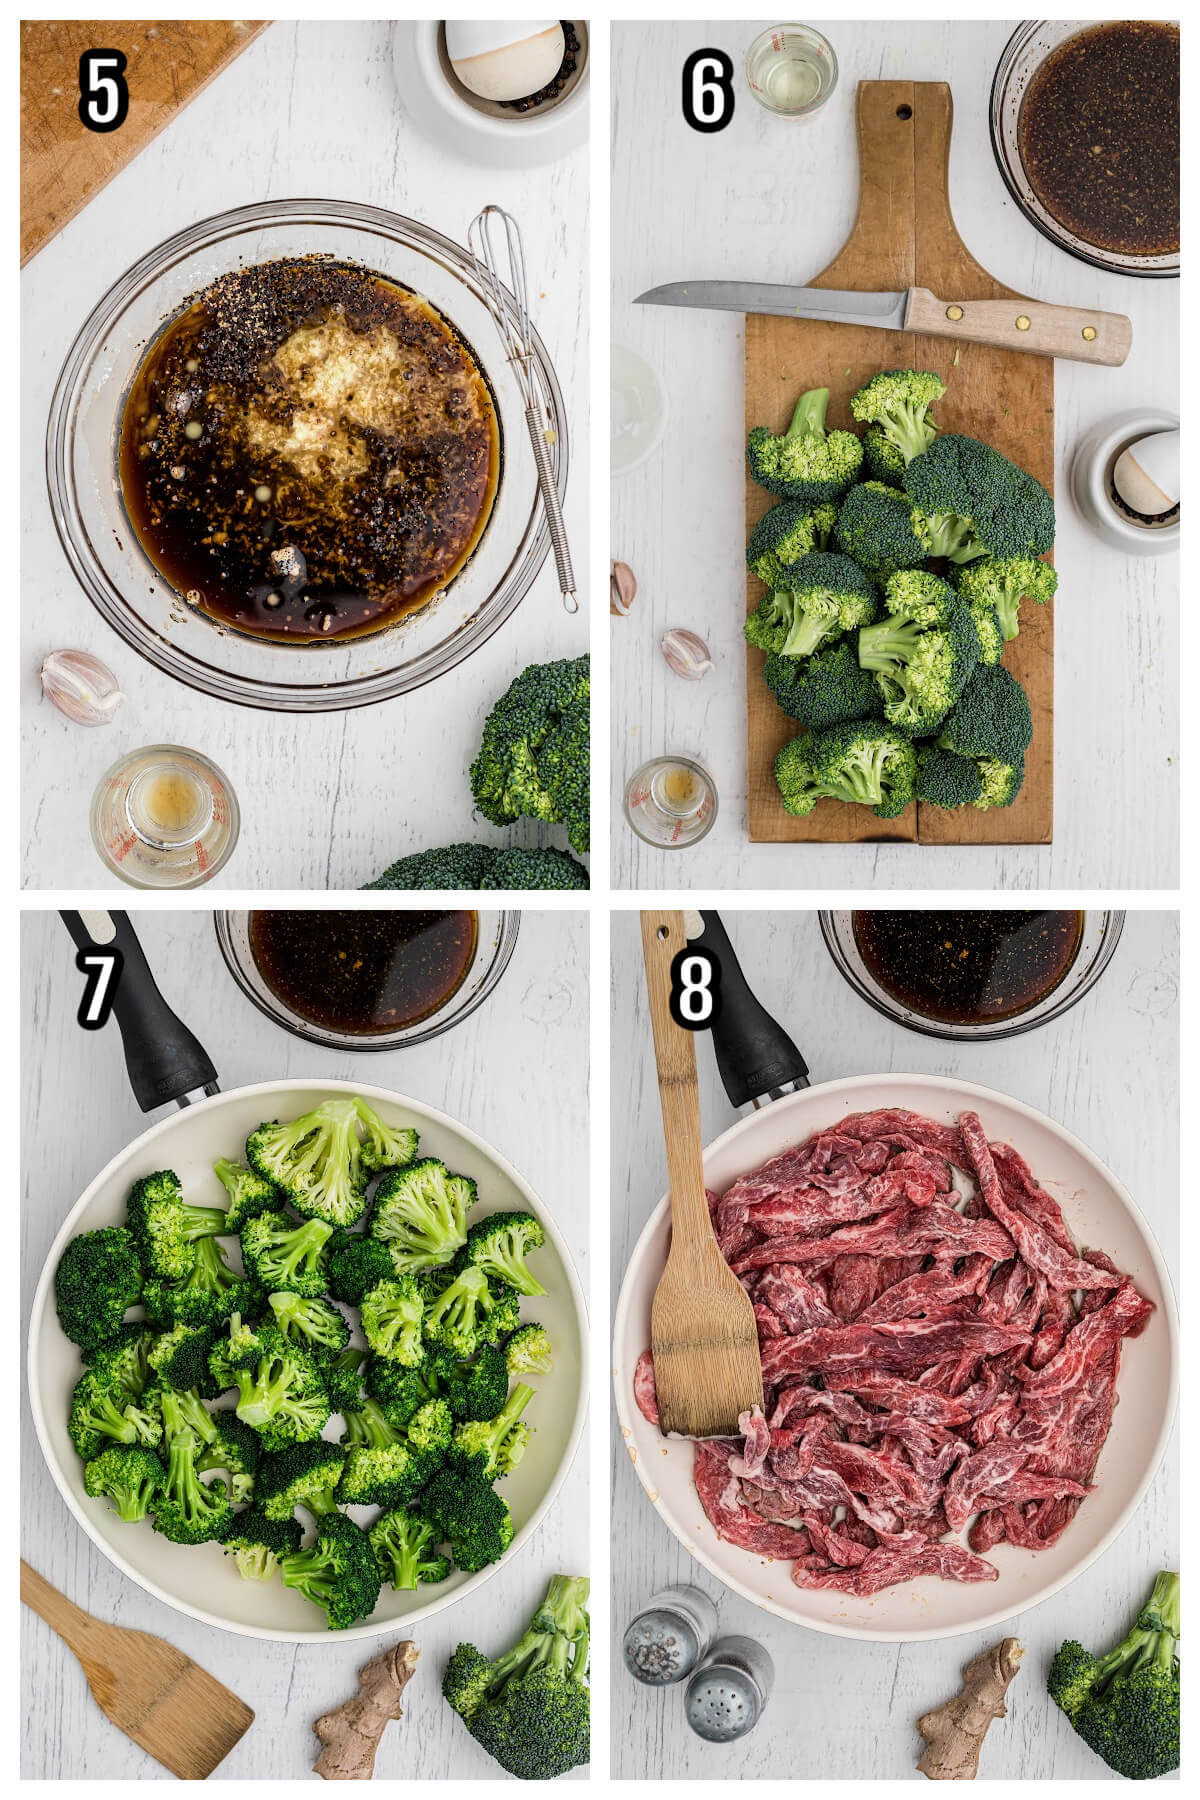 Steps 5-8 for Broccoli Beef Recipe. 